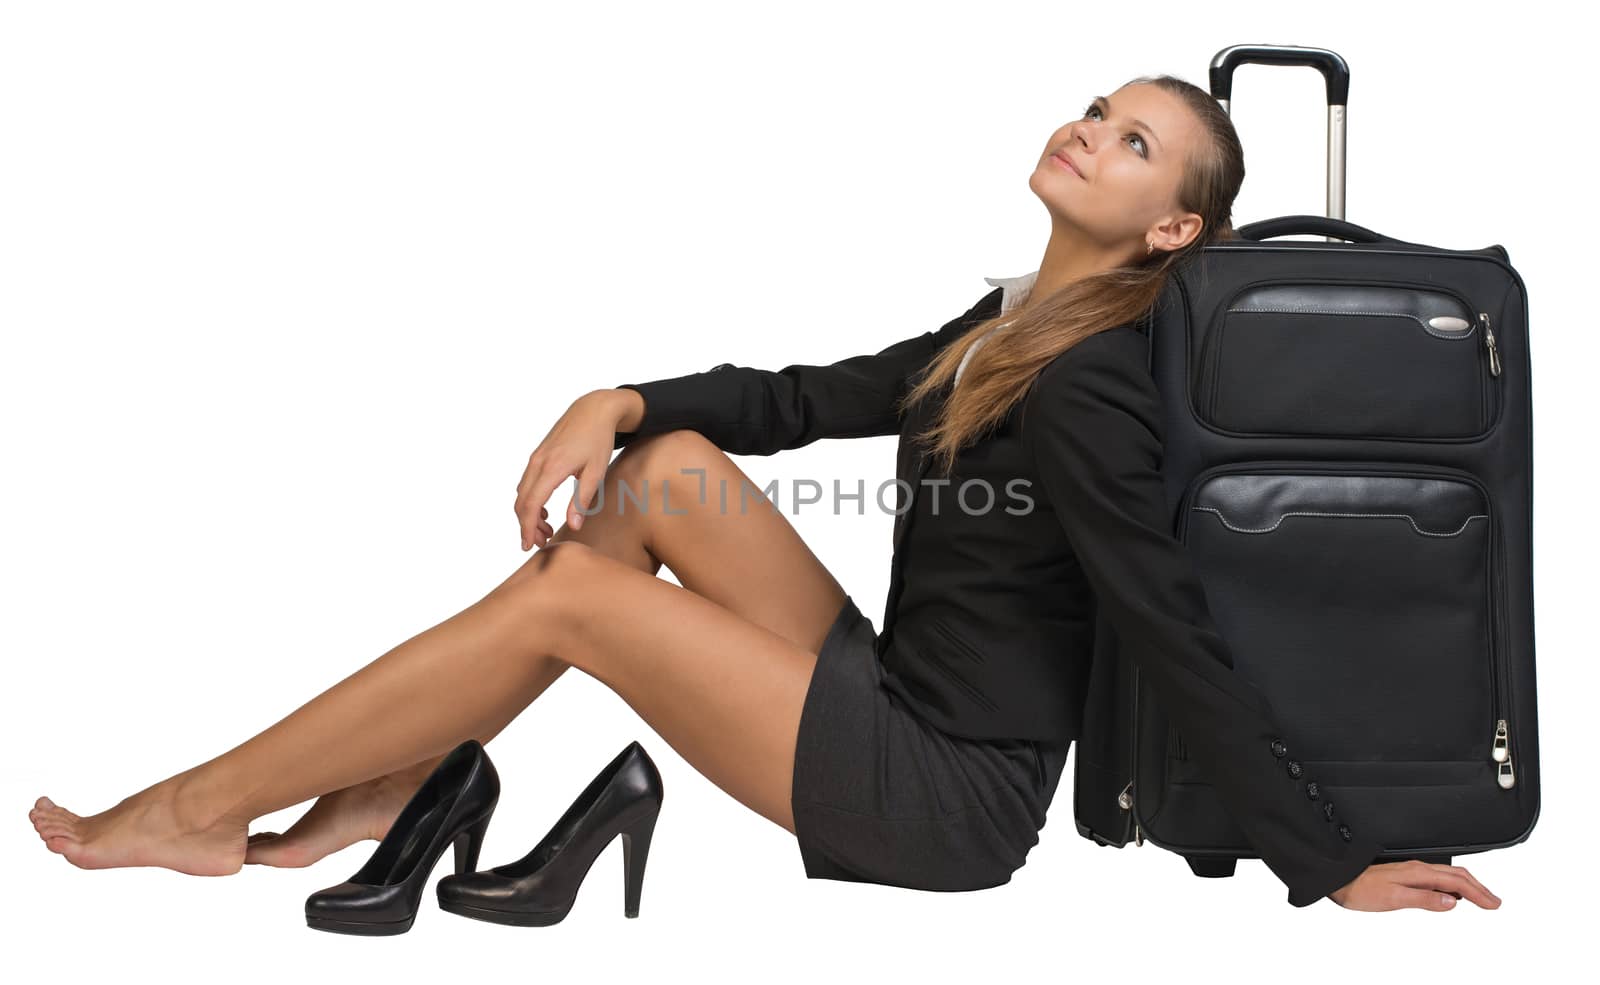 Businesswoman with her shoes off sitting hand resting on the floor, next to front view suitcase with extended handle, looking upwards. Isolated over white background